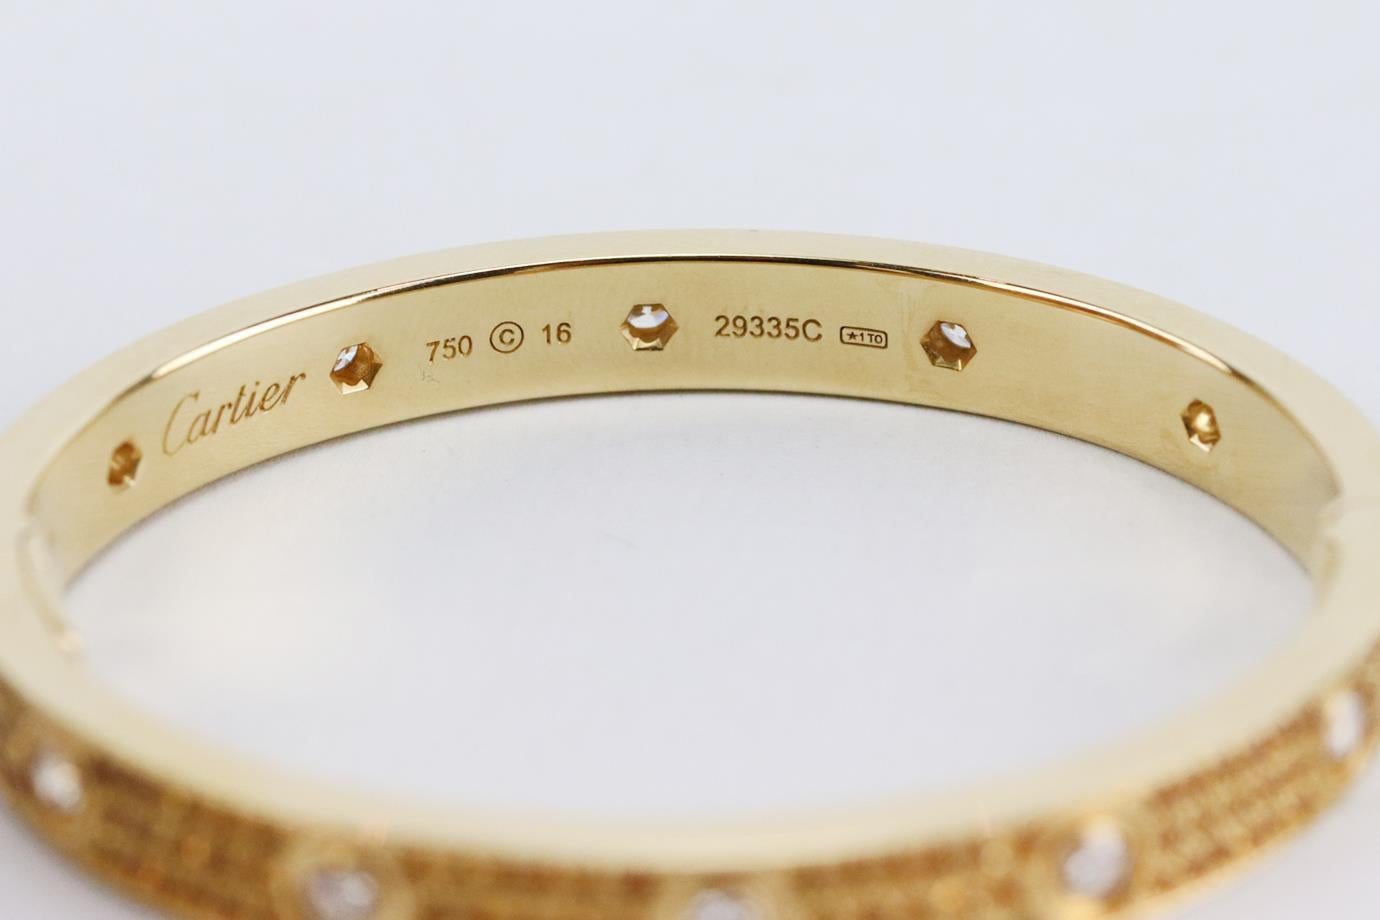 Cartier Love 18K Yellow Gold, Diamond And Spessartite Garnet Bracelet 16 CM In Excellent Condition For Sale In London, GB